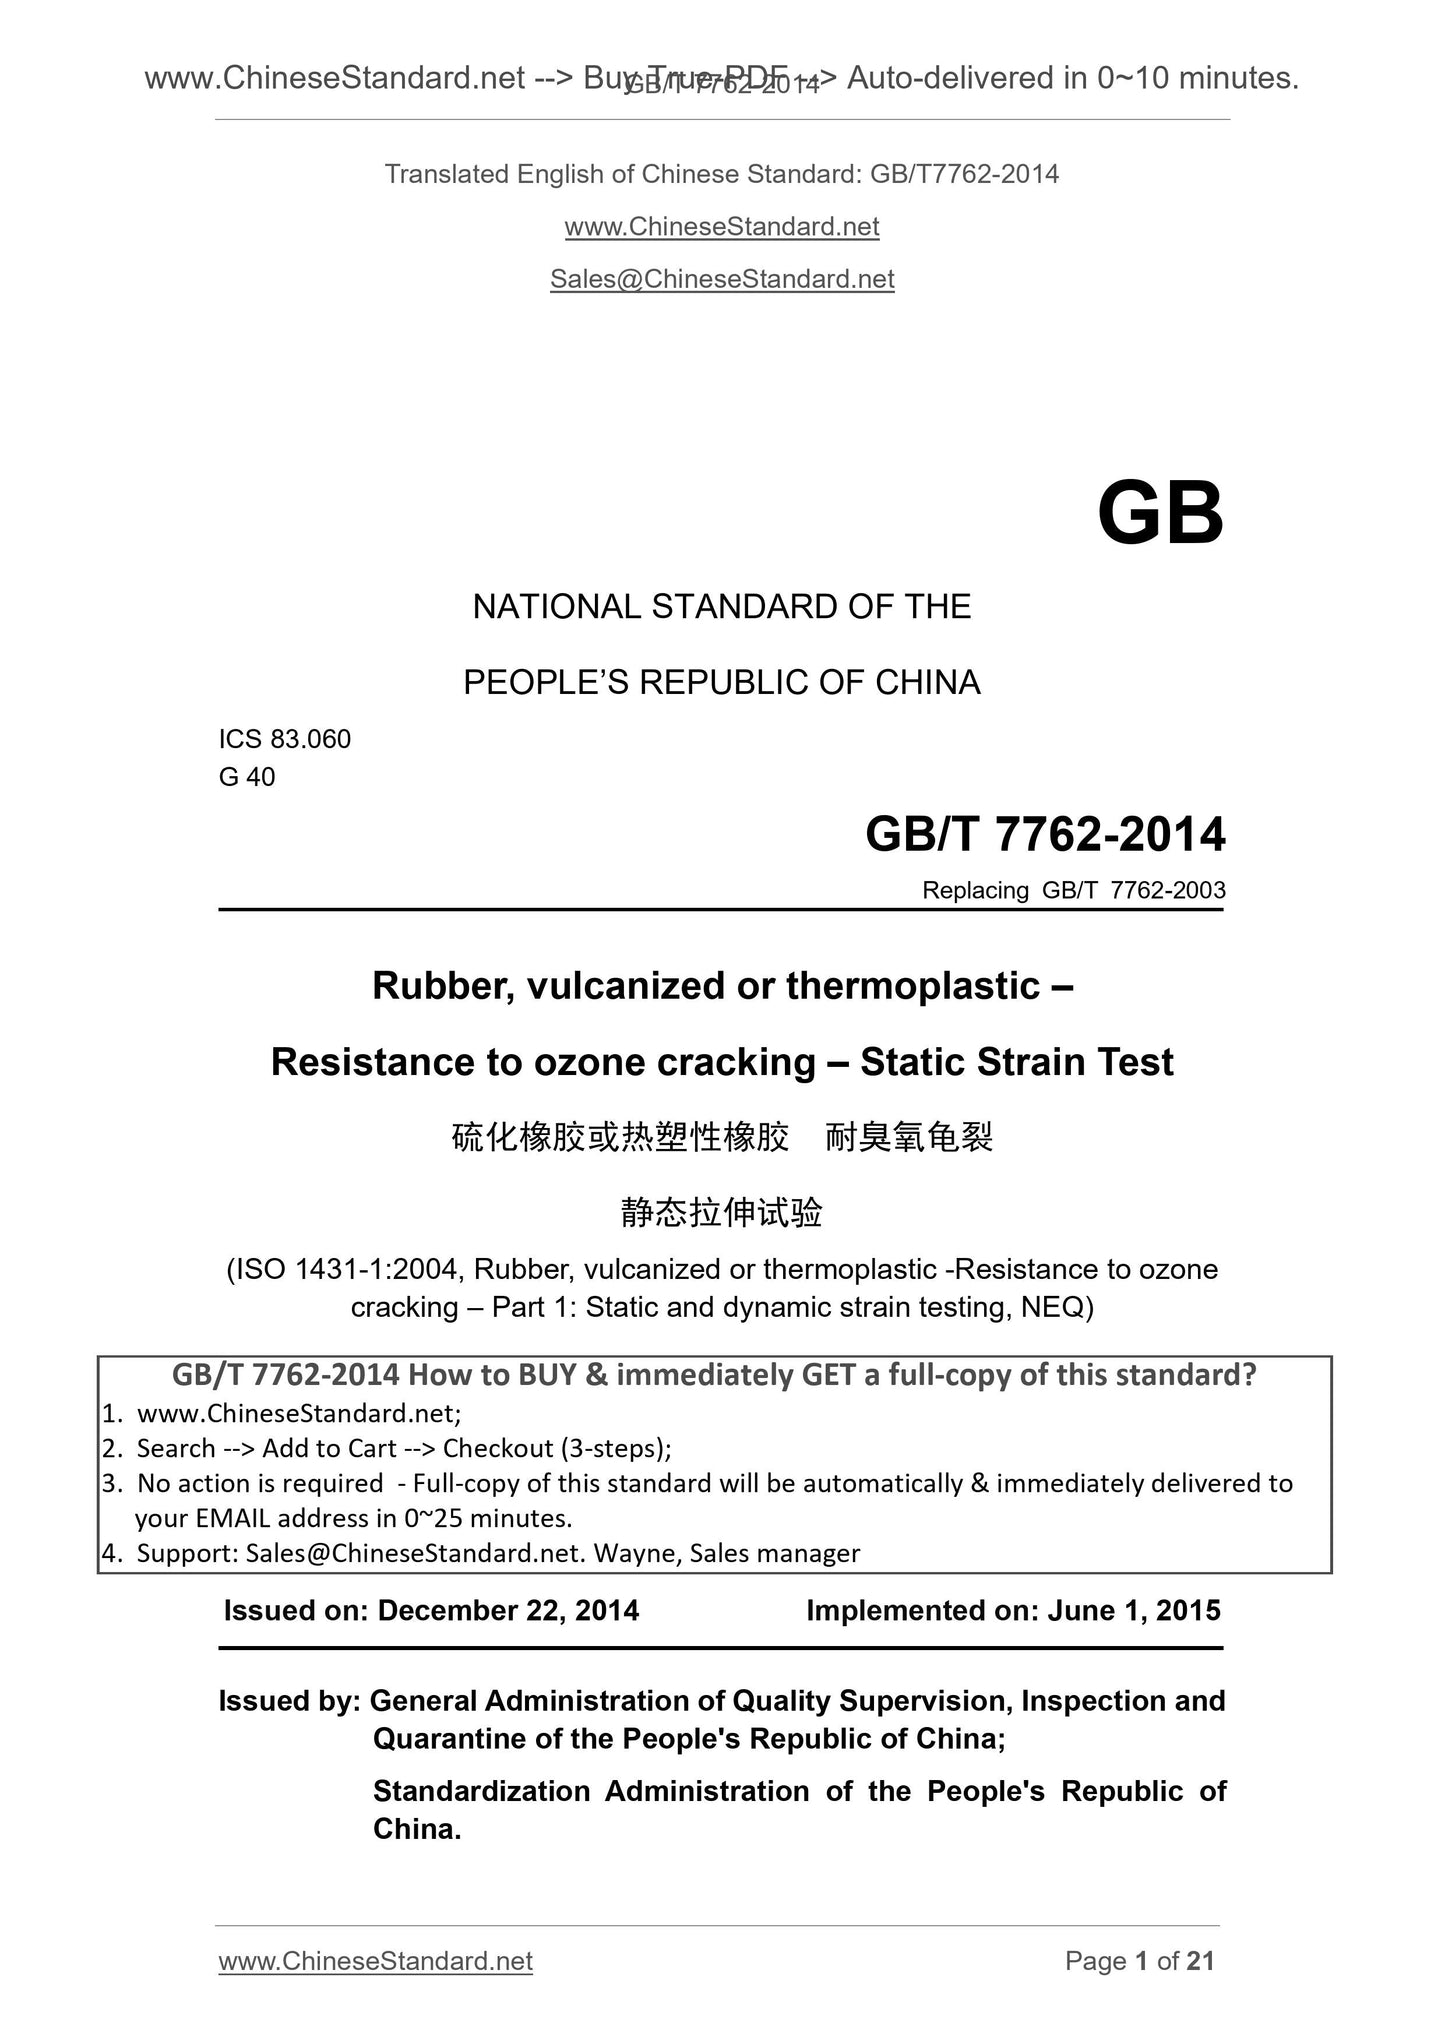 GB/T 7762-2014 Page 1